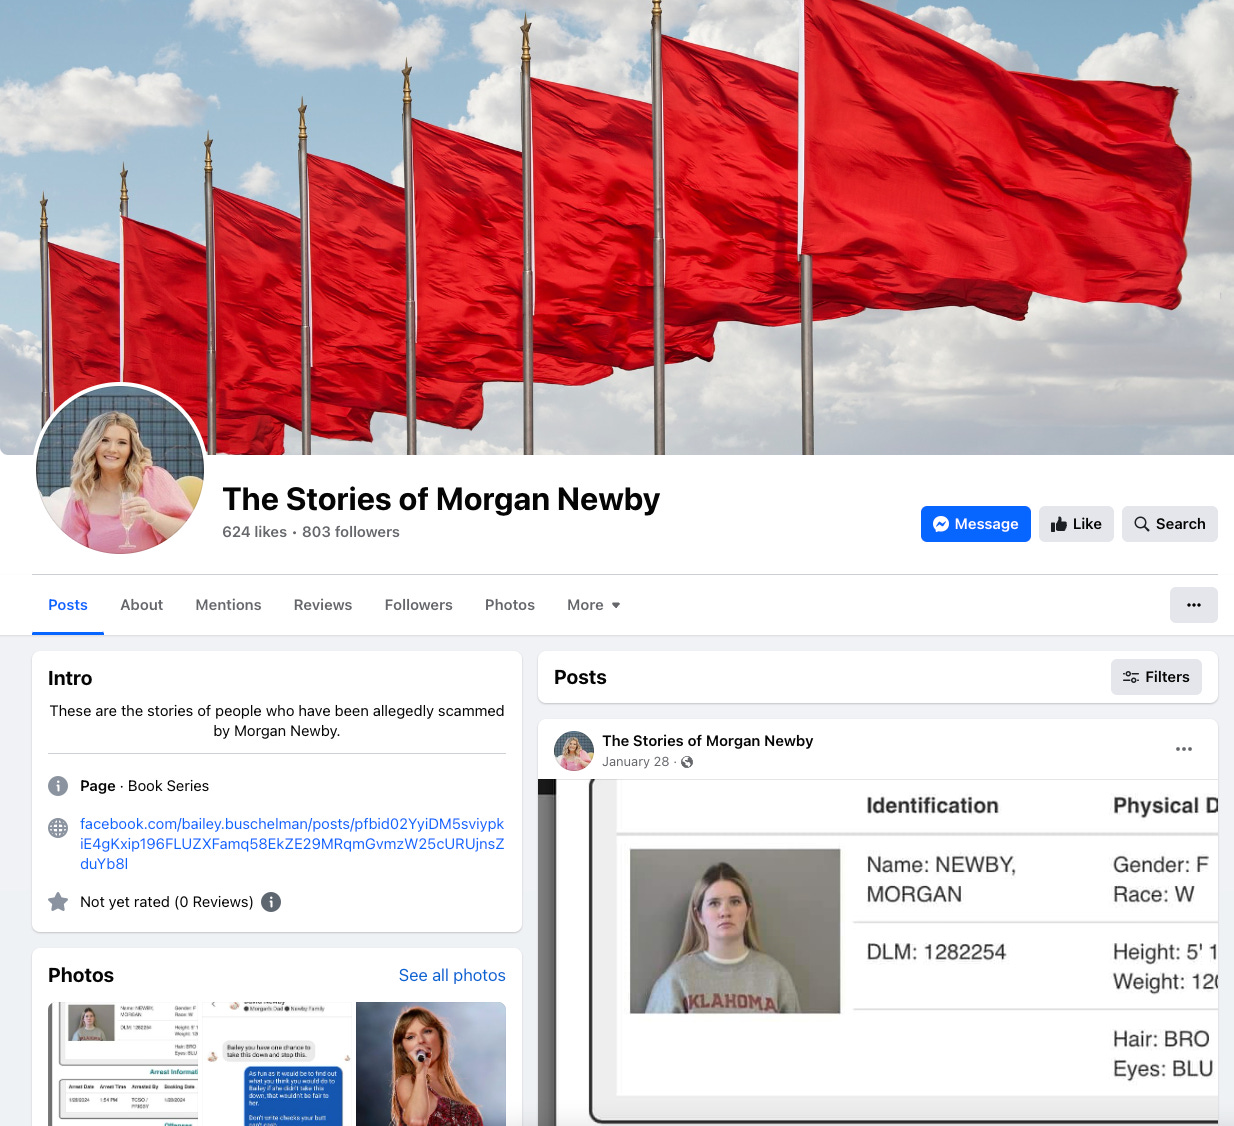 screen capture of the Facebook Page The Sties of Morgan Newby featuring red flags as the cover photo